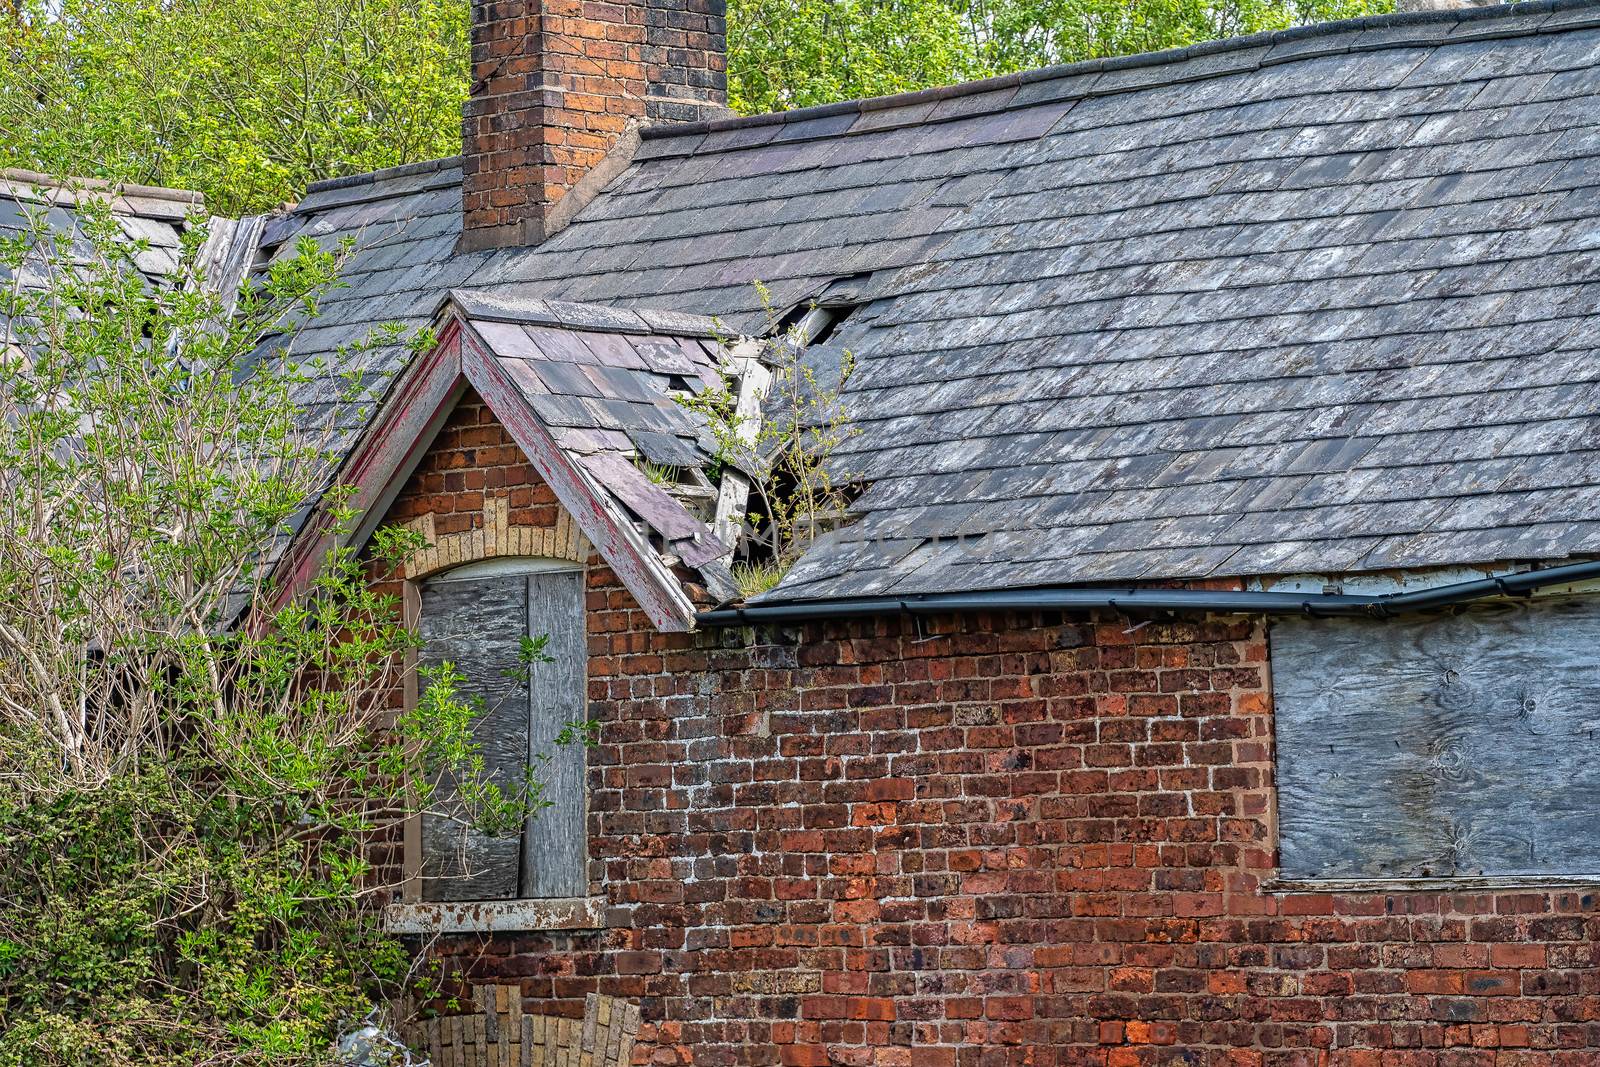 Damaged slate roof tiles on a pitched roof on a derelict house